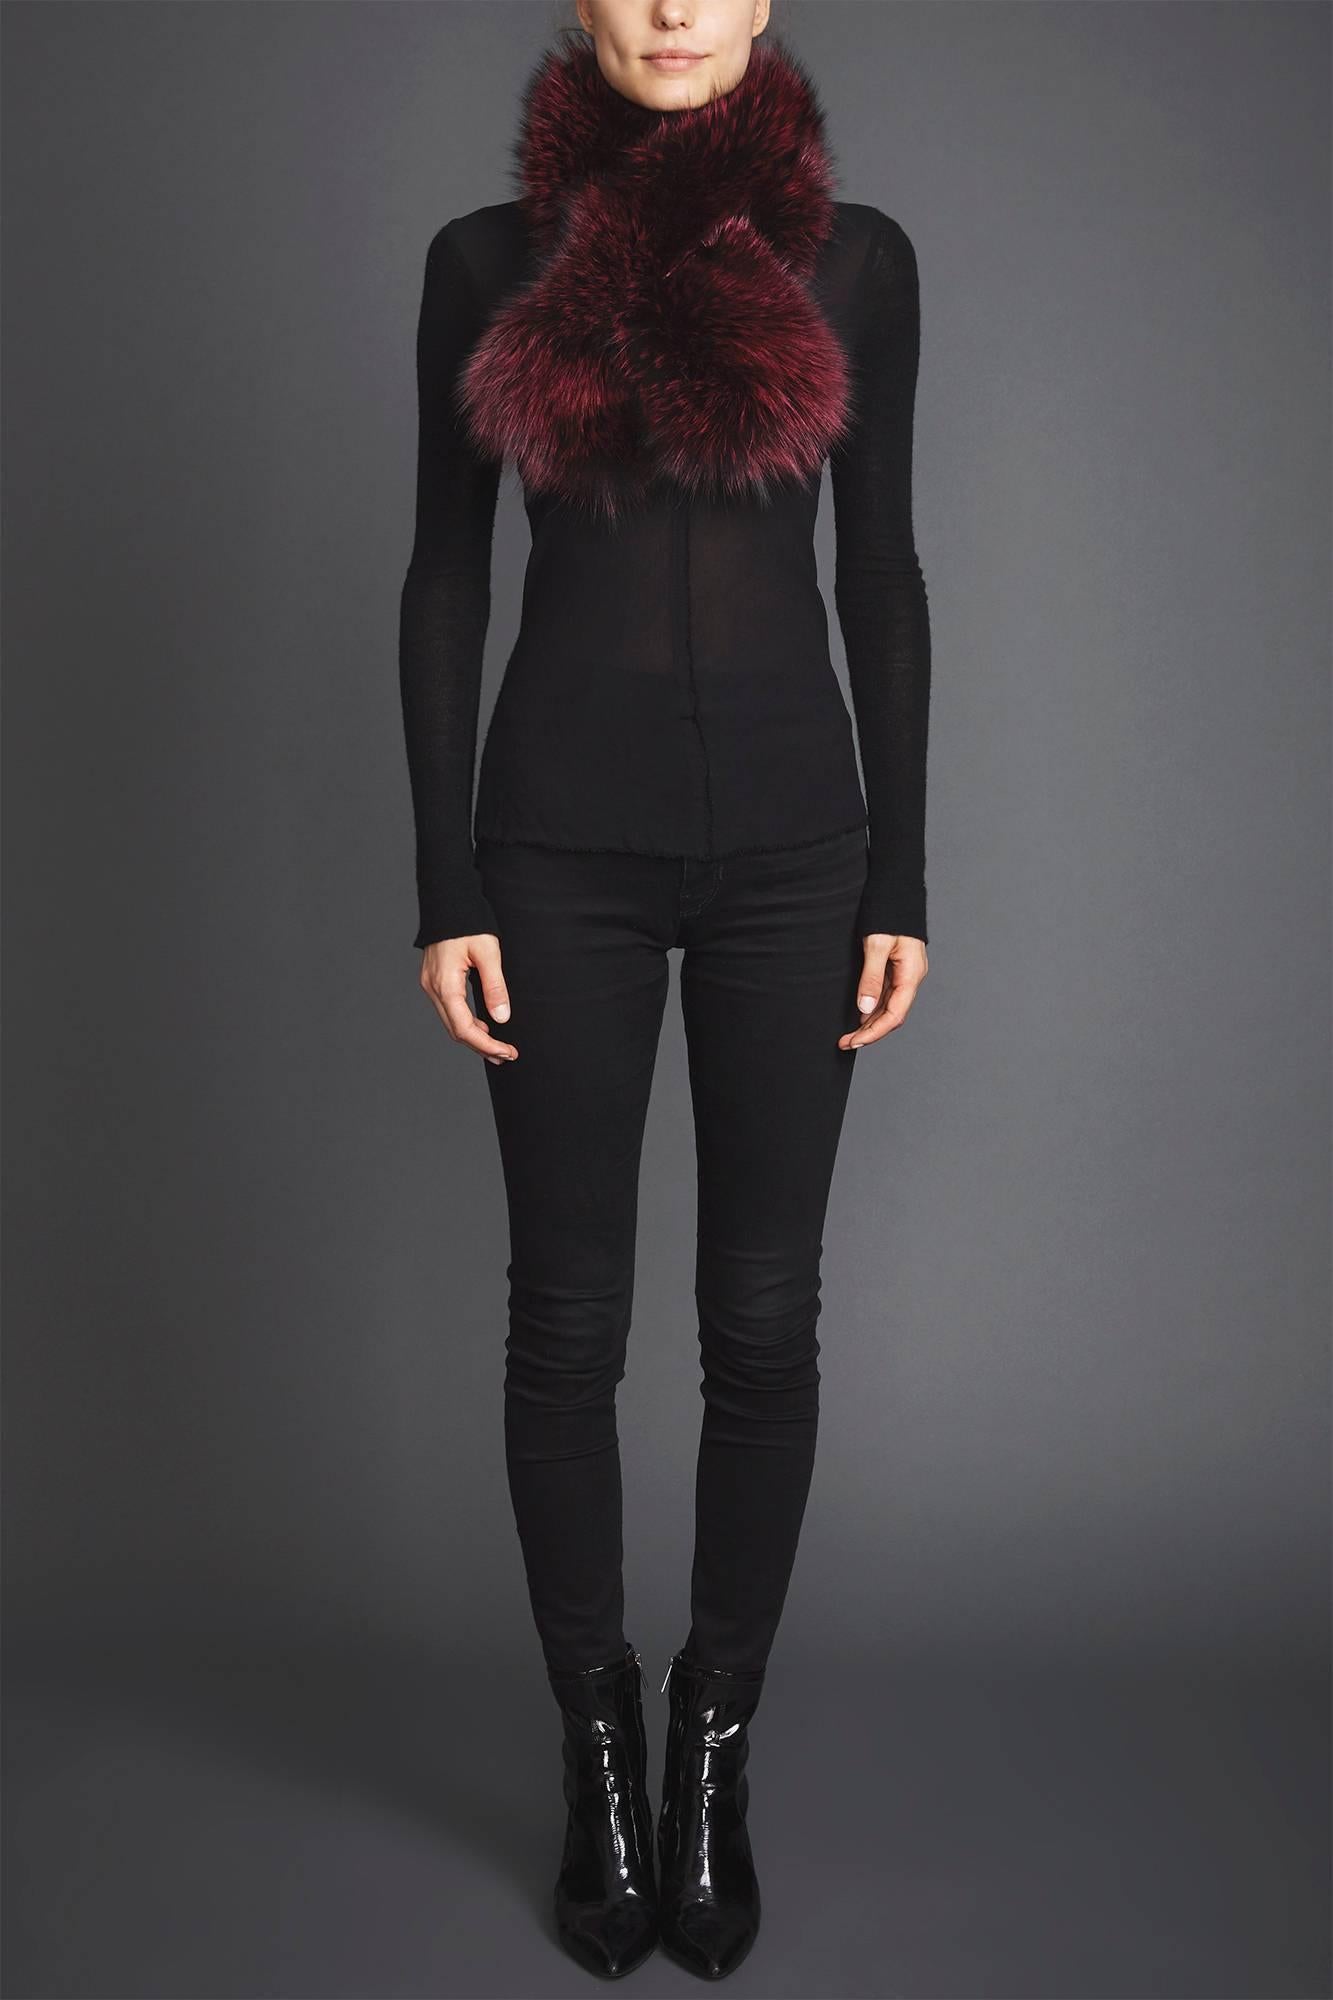 Verheyen London Lapel Cross-through Collar in Soft Ruby Fox Fur

RRP Price 

The Lapel Cross-through Collar is Verheyen London’s casual everyday design, which is perfectly shaped to wear over any outfit. Designed for layering, this structured shape,